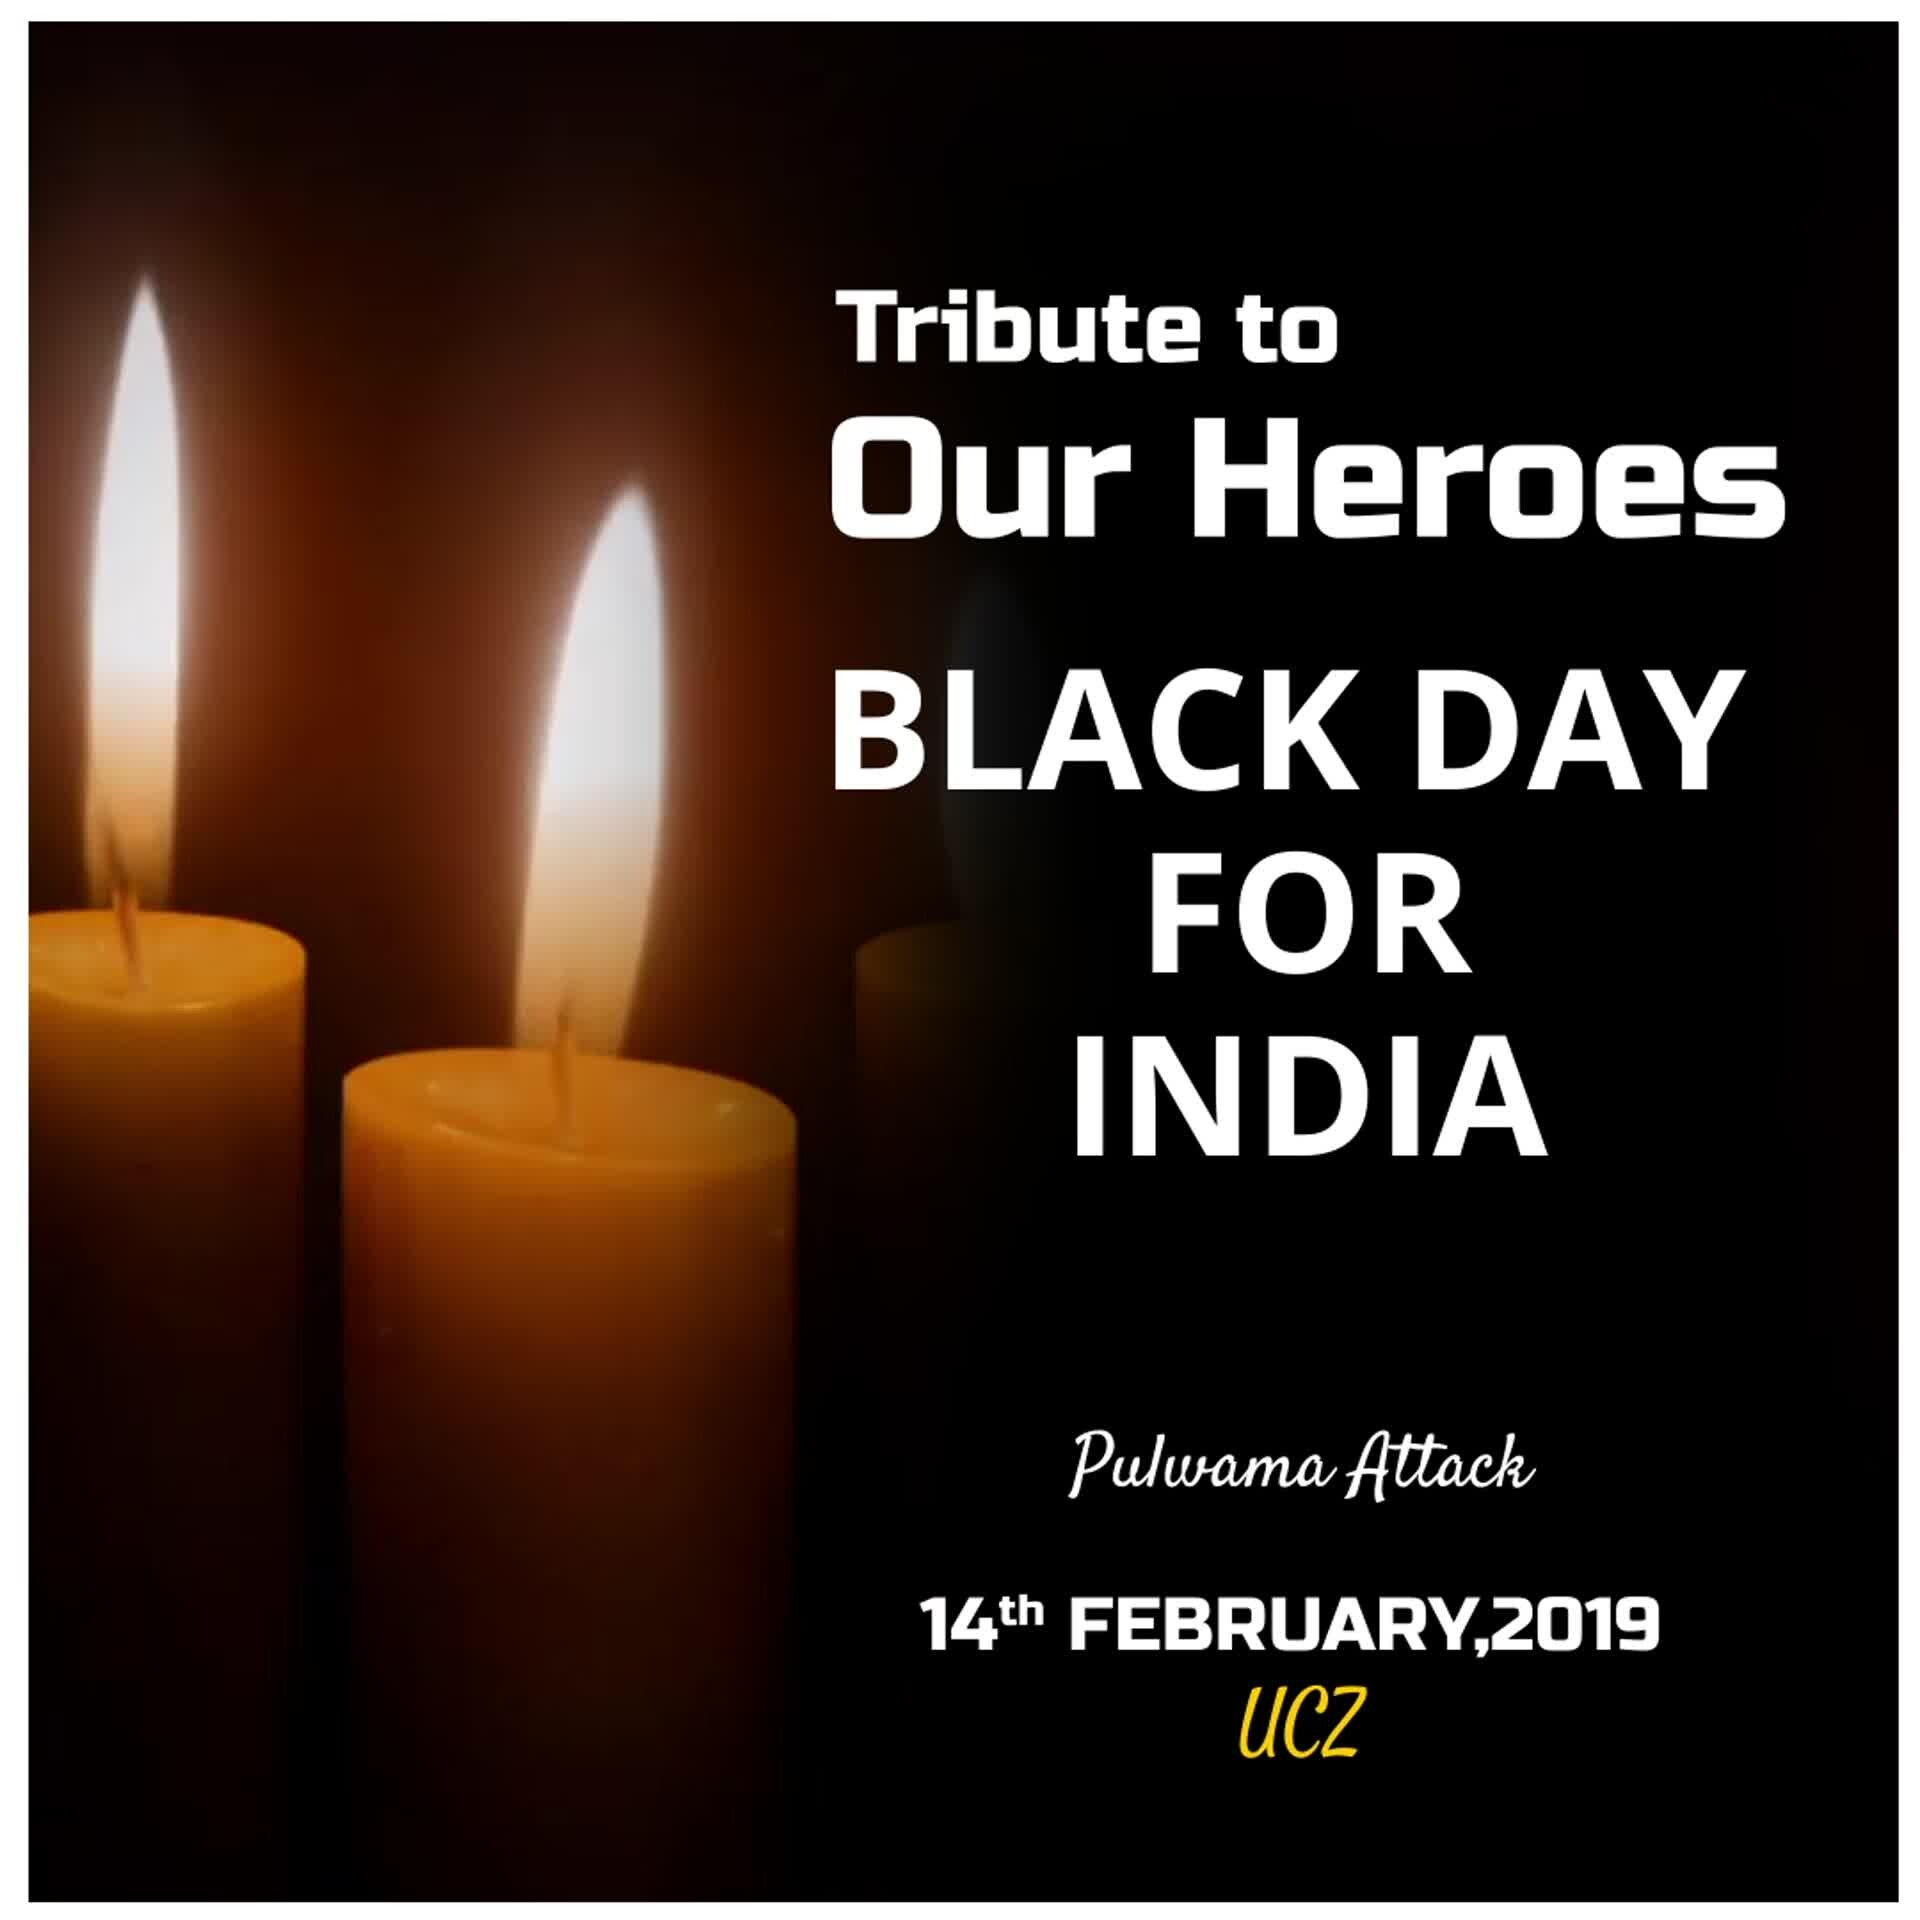 BLACK DAY FOR INDIA POSTER – India NCC